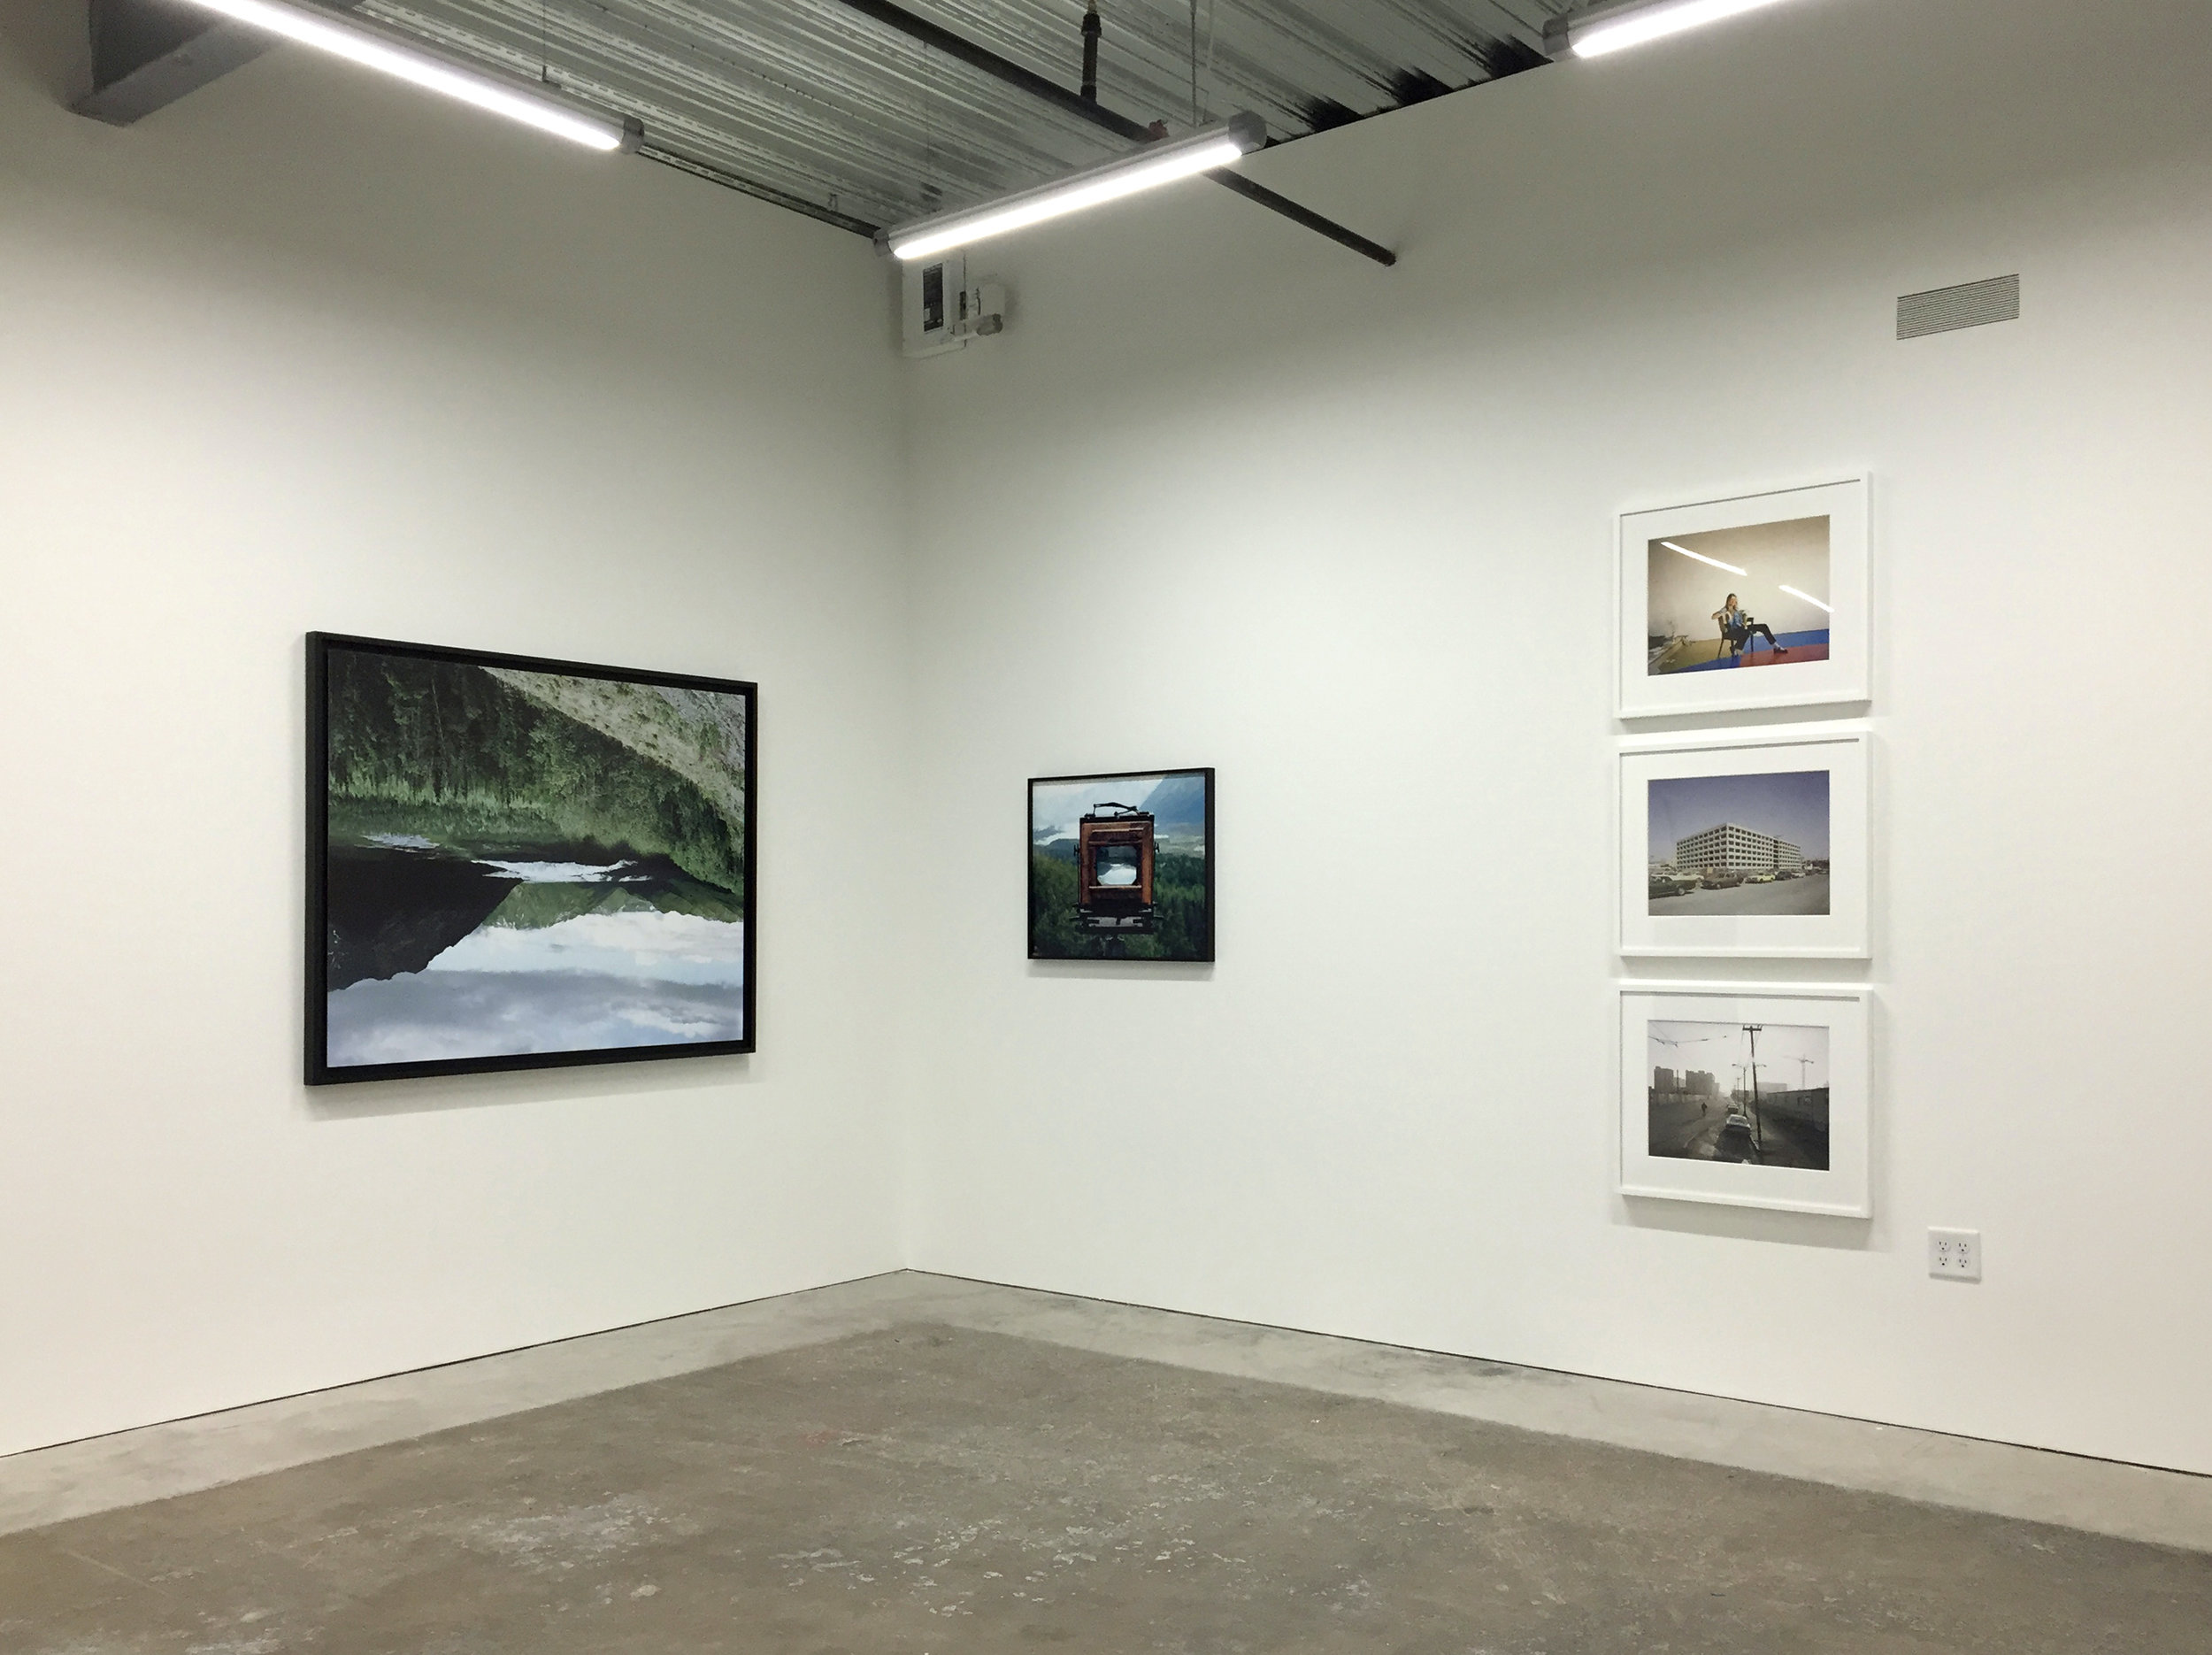  CHRISTINA SEELY,&nbsp; Defluo Glacies and Matanuska Glacier, Alaska,  2011; JANET DELANEY,&nbsp; Artist in her studio, Project One, 10th at Howard Street, 1979  and  First Office Building in redevelopment zone, from Lapu-Lapu Street, 1980  and  Satu